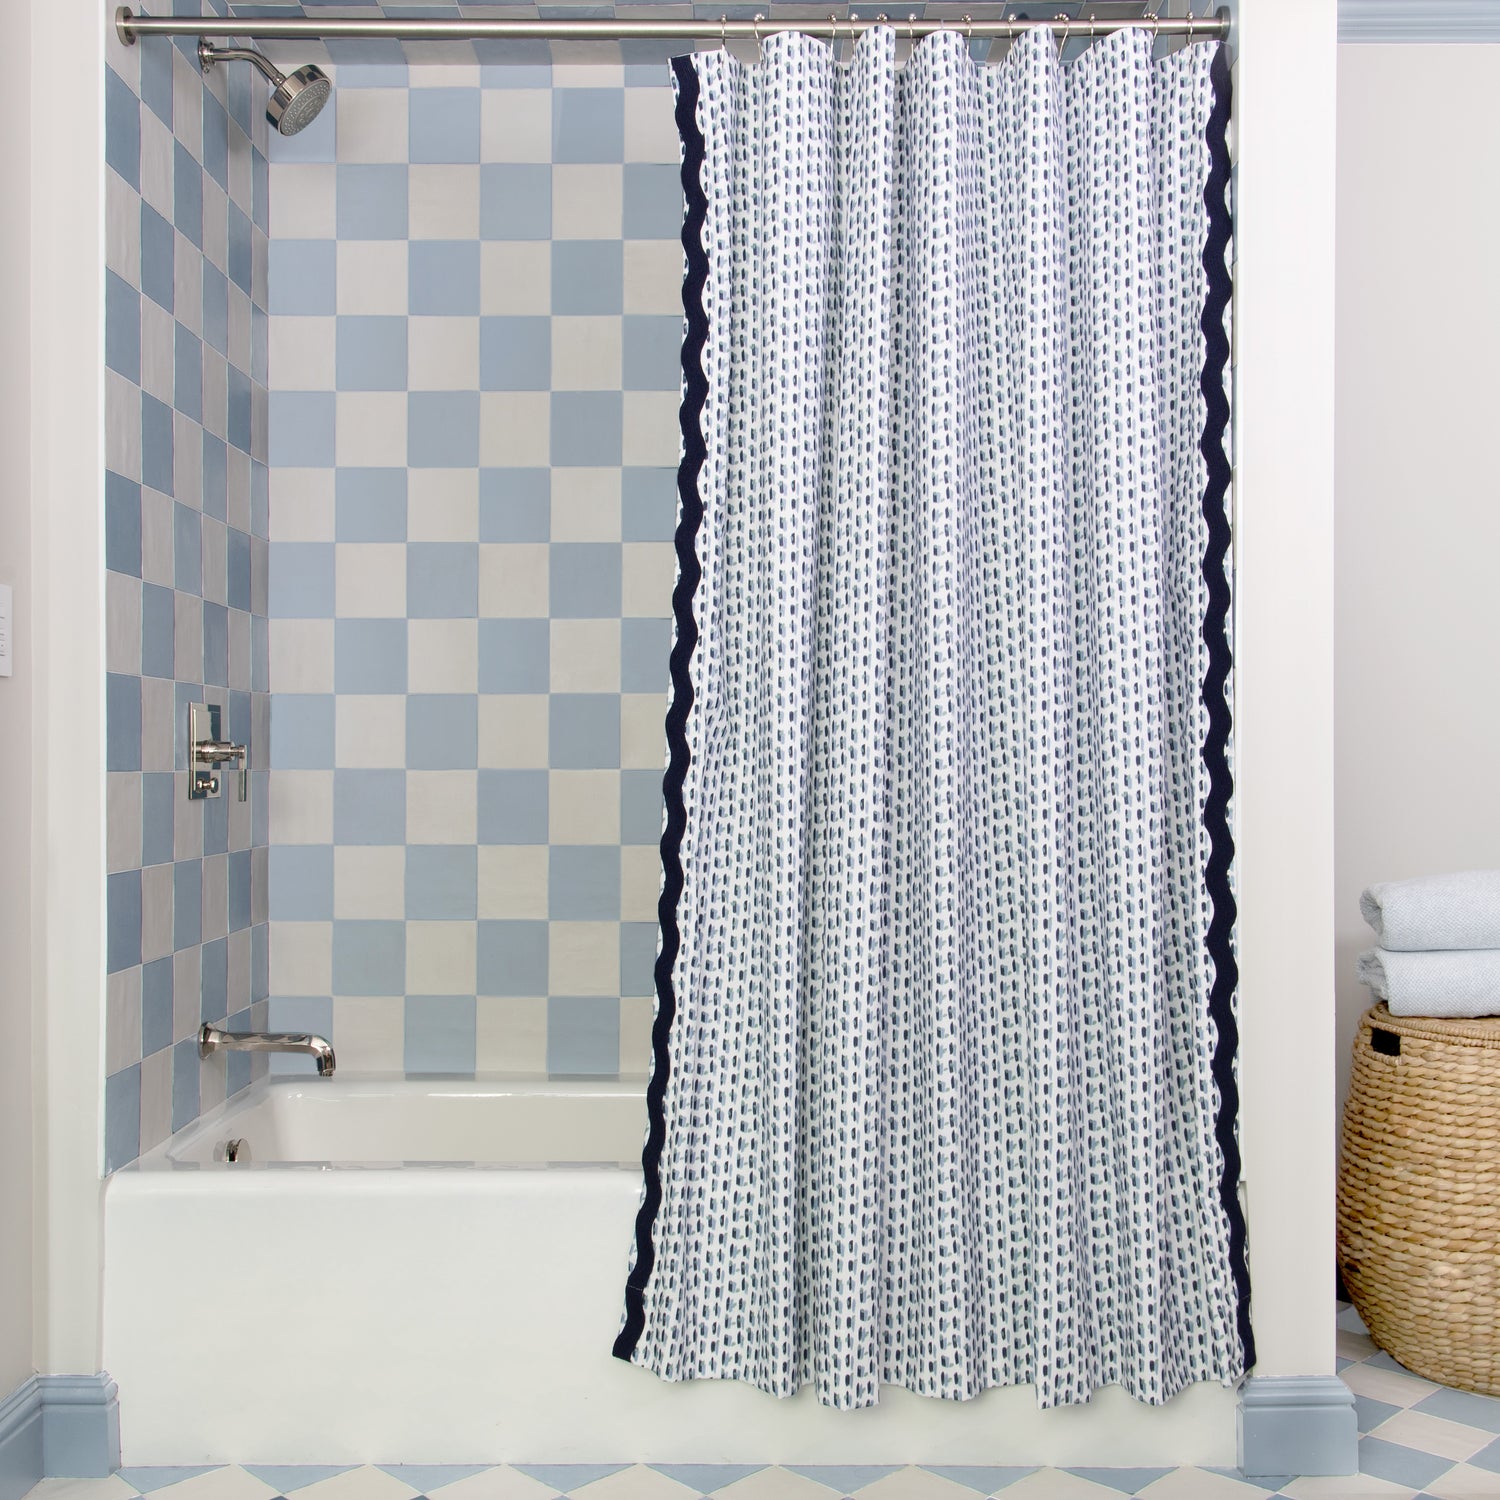 Sky and Navy Blue Poppy Printed shower curtain hanging on rod in front of white tub in bathroom with blue and white tiles